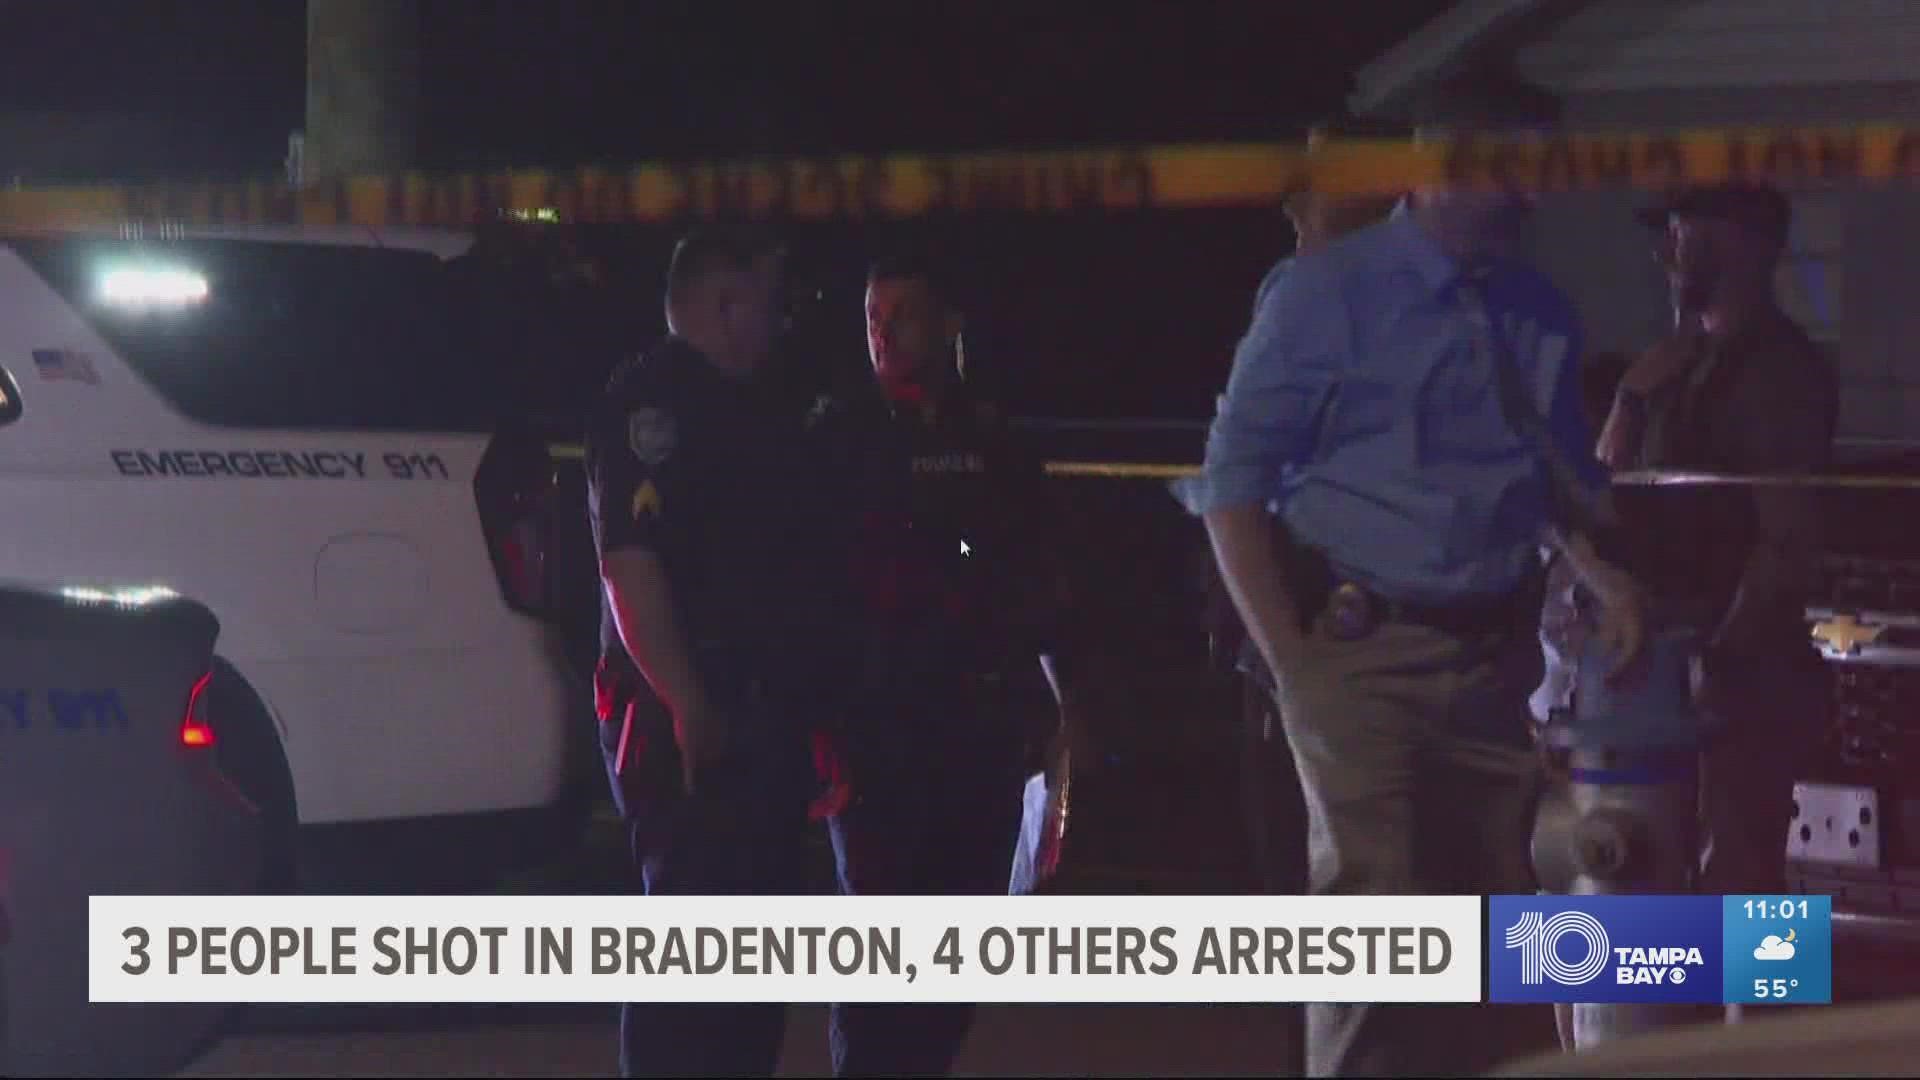 According to Bradenton police, nearby officers heard the shots and then saw a blue car speeding down the road.